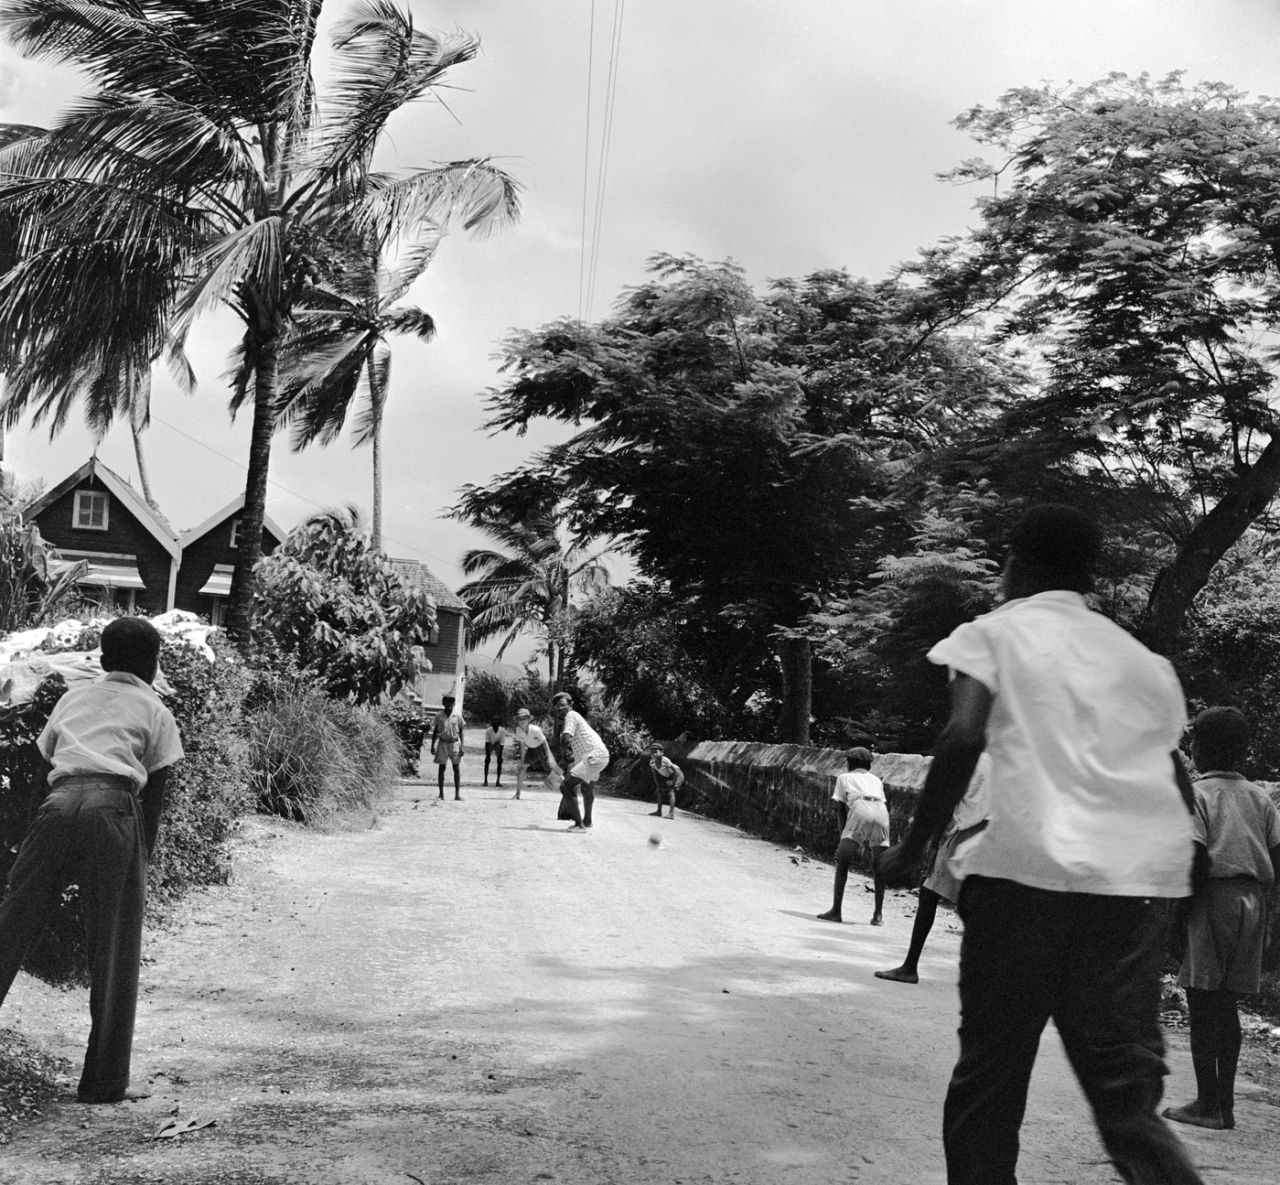 Children play cricket in a street in Port-of-Spain, Trinidad, August 1956